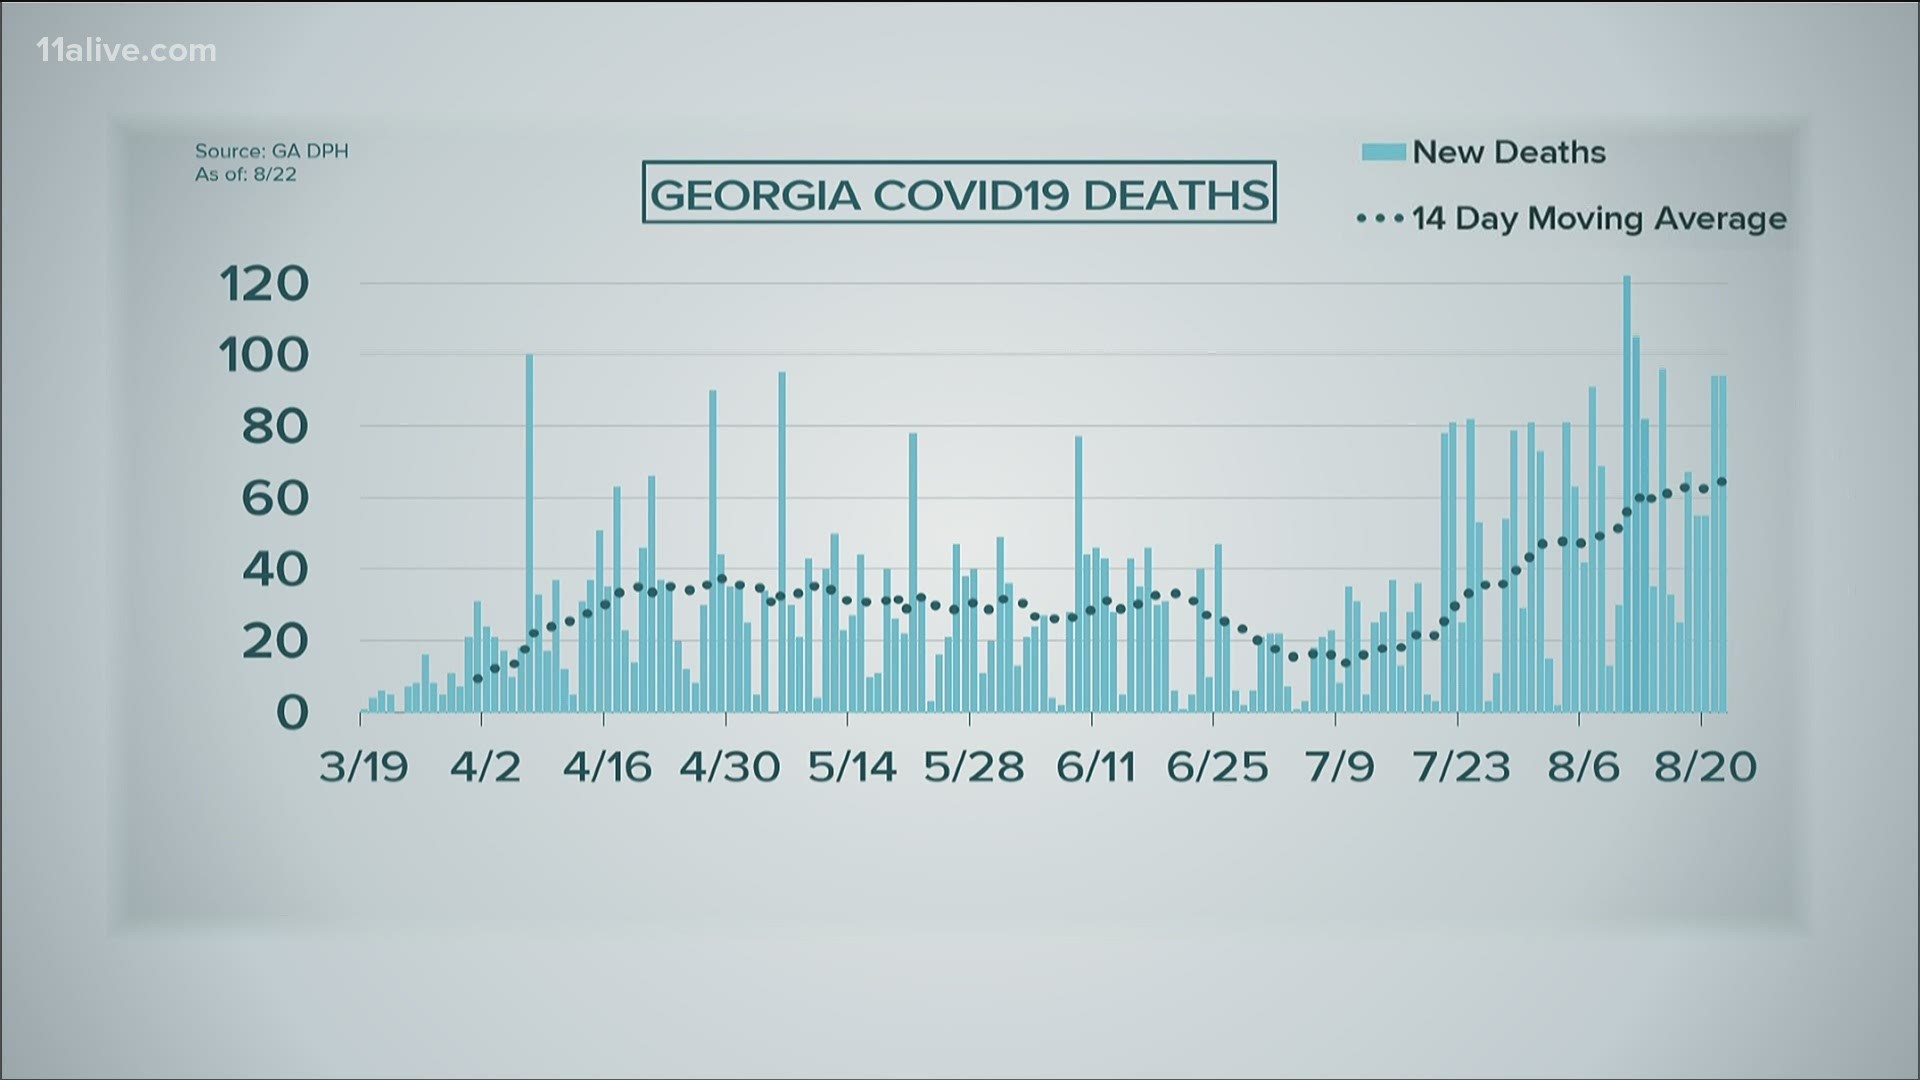 In the last two days, the number of deaths has exceeded the 14-day average.